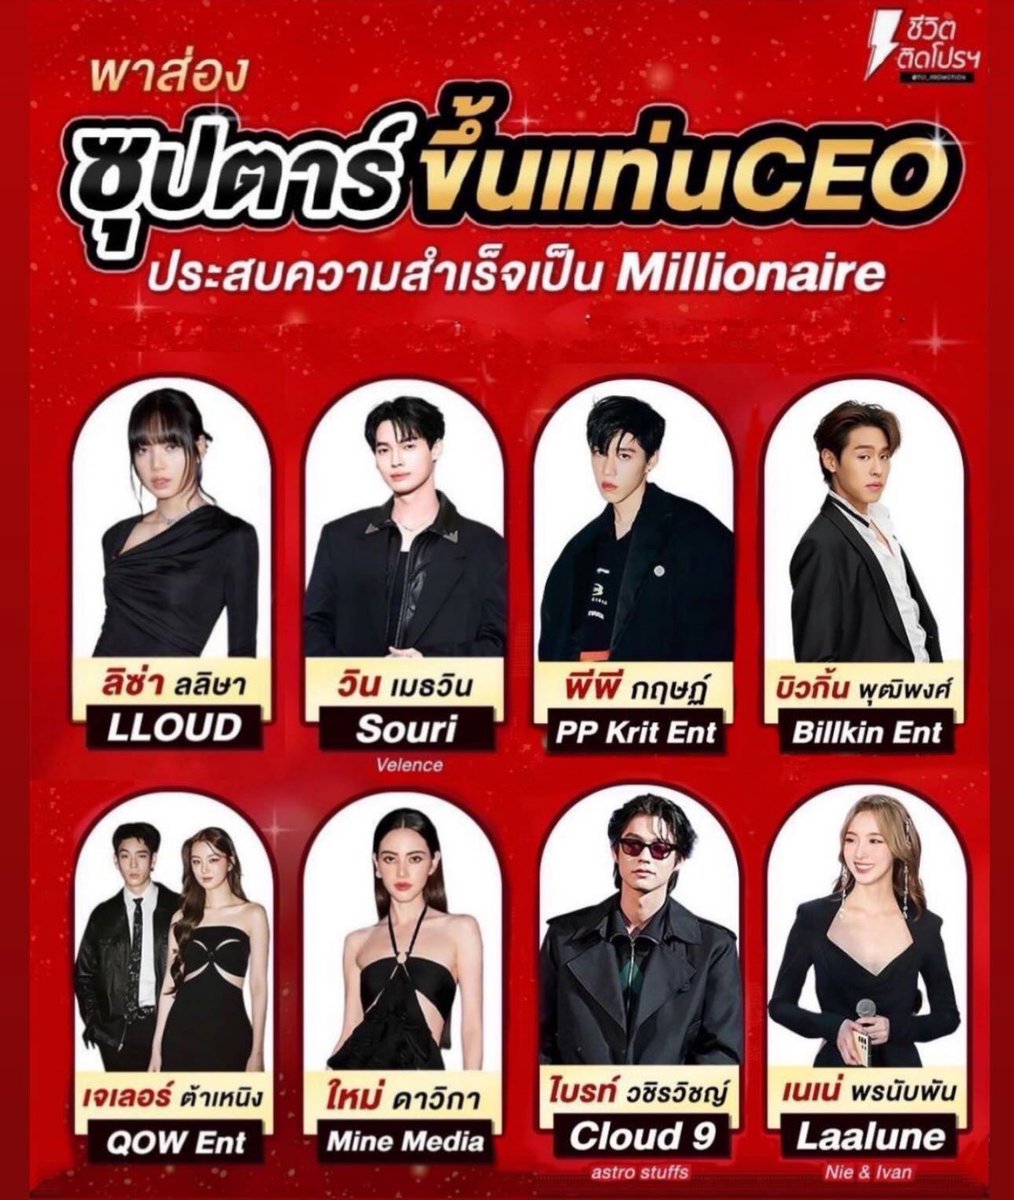 everyone is the ceo of their own entertainment company and there’s my man already said to be successful millionaire just by owning two brands: souri and velence, in which souri is the talk of town everyday 😭🤣💕

#souri #souribkk
#velence #velencebkk
#winmetawin @winmetawin